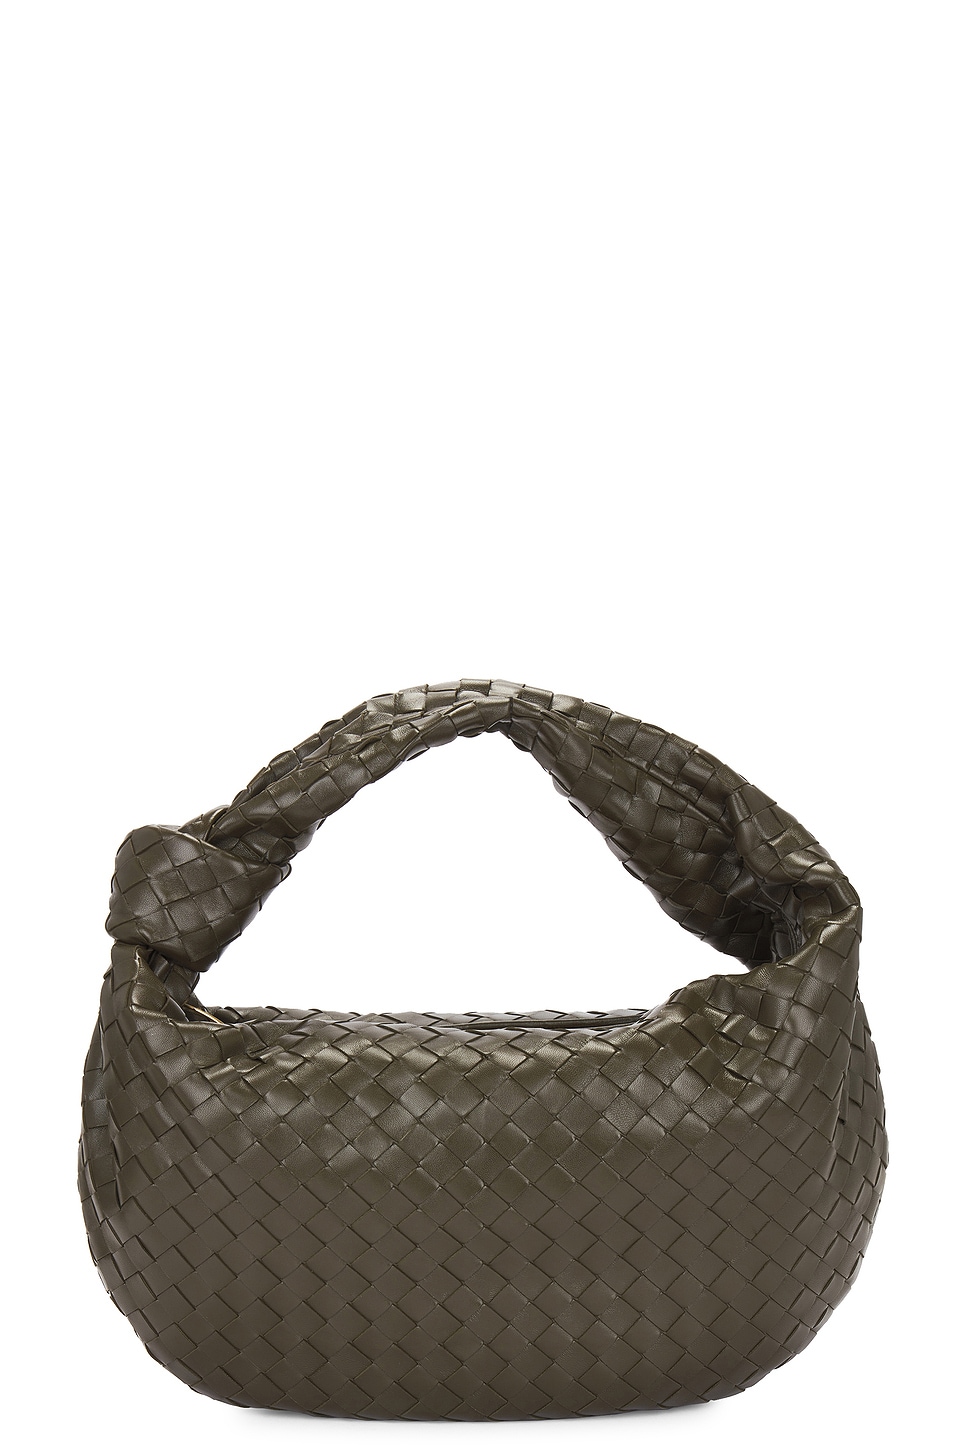 Small Jodie Bag in Olive